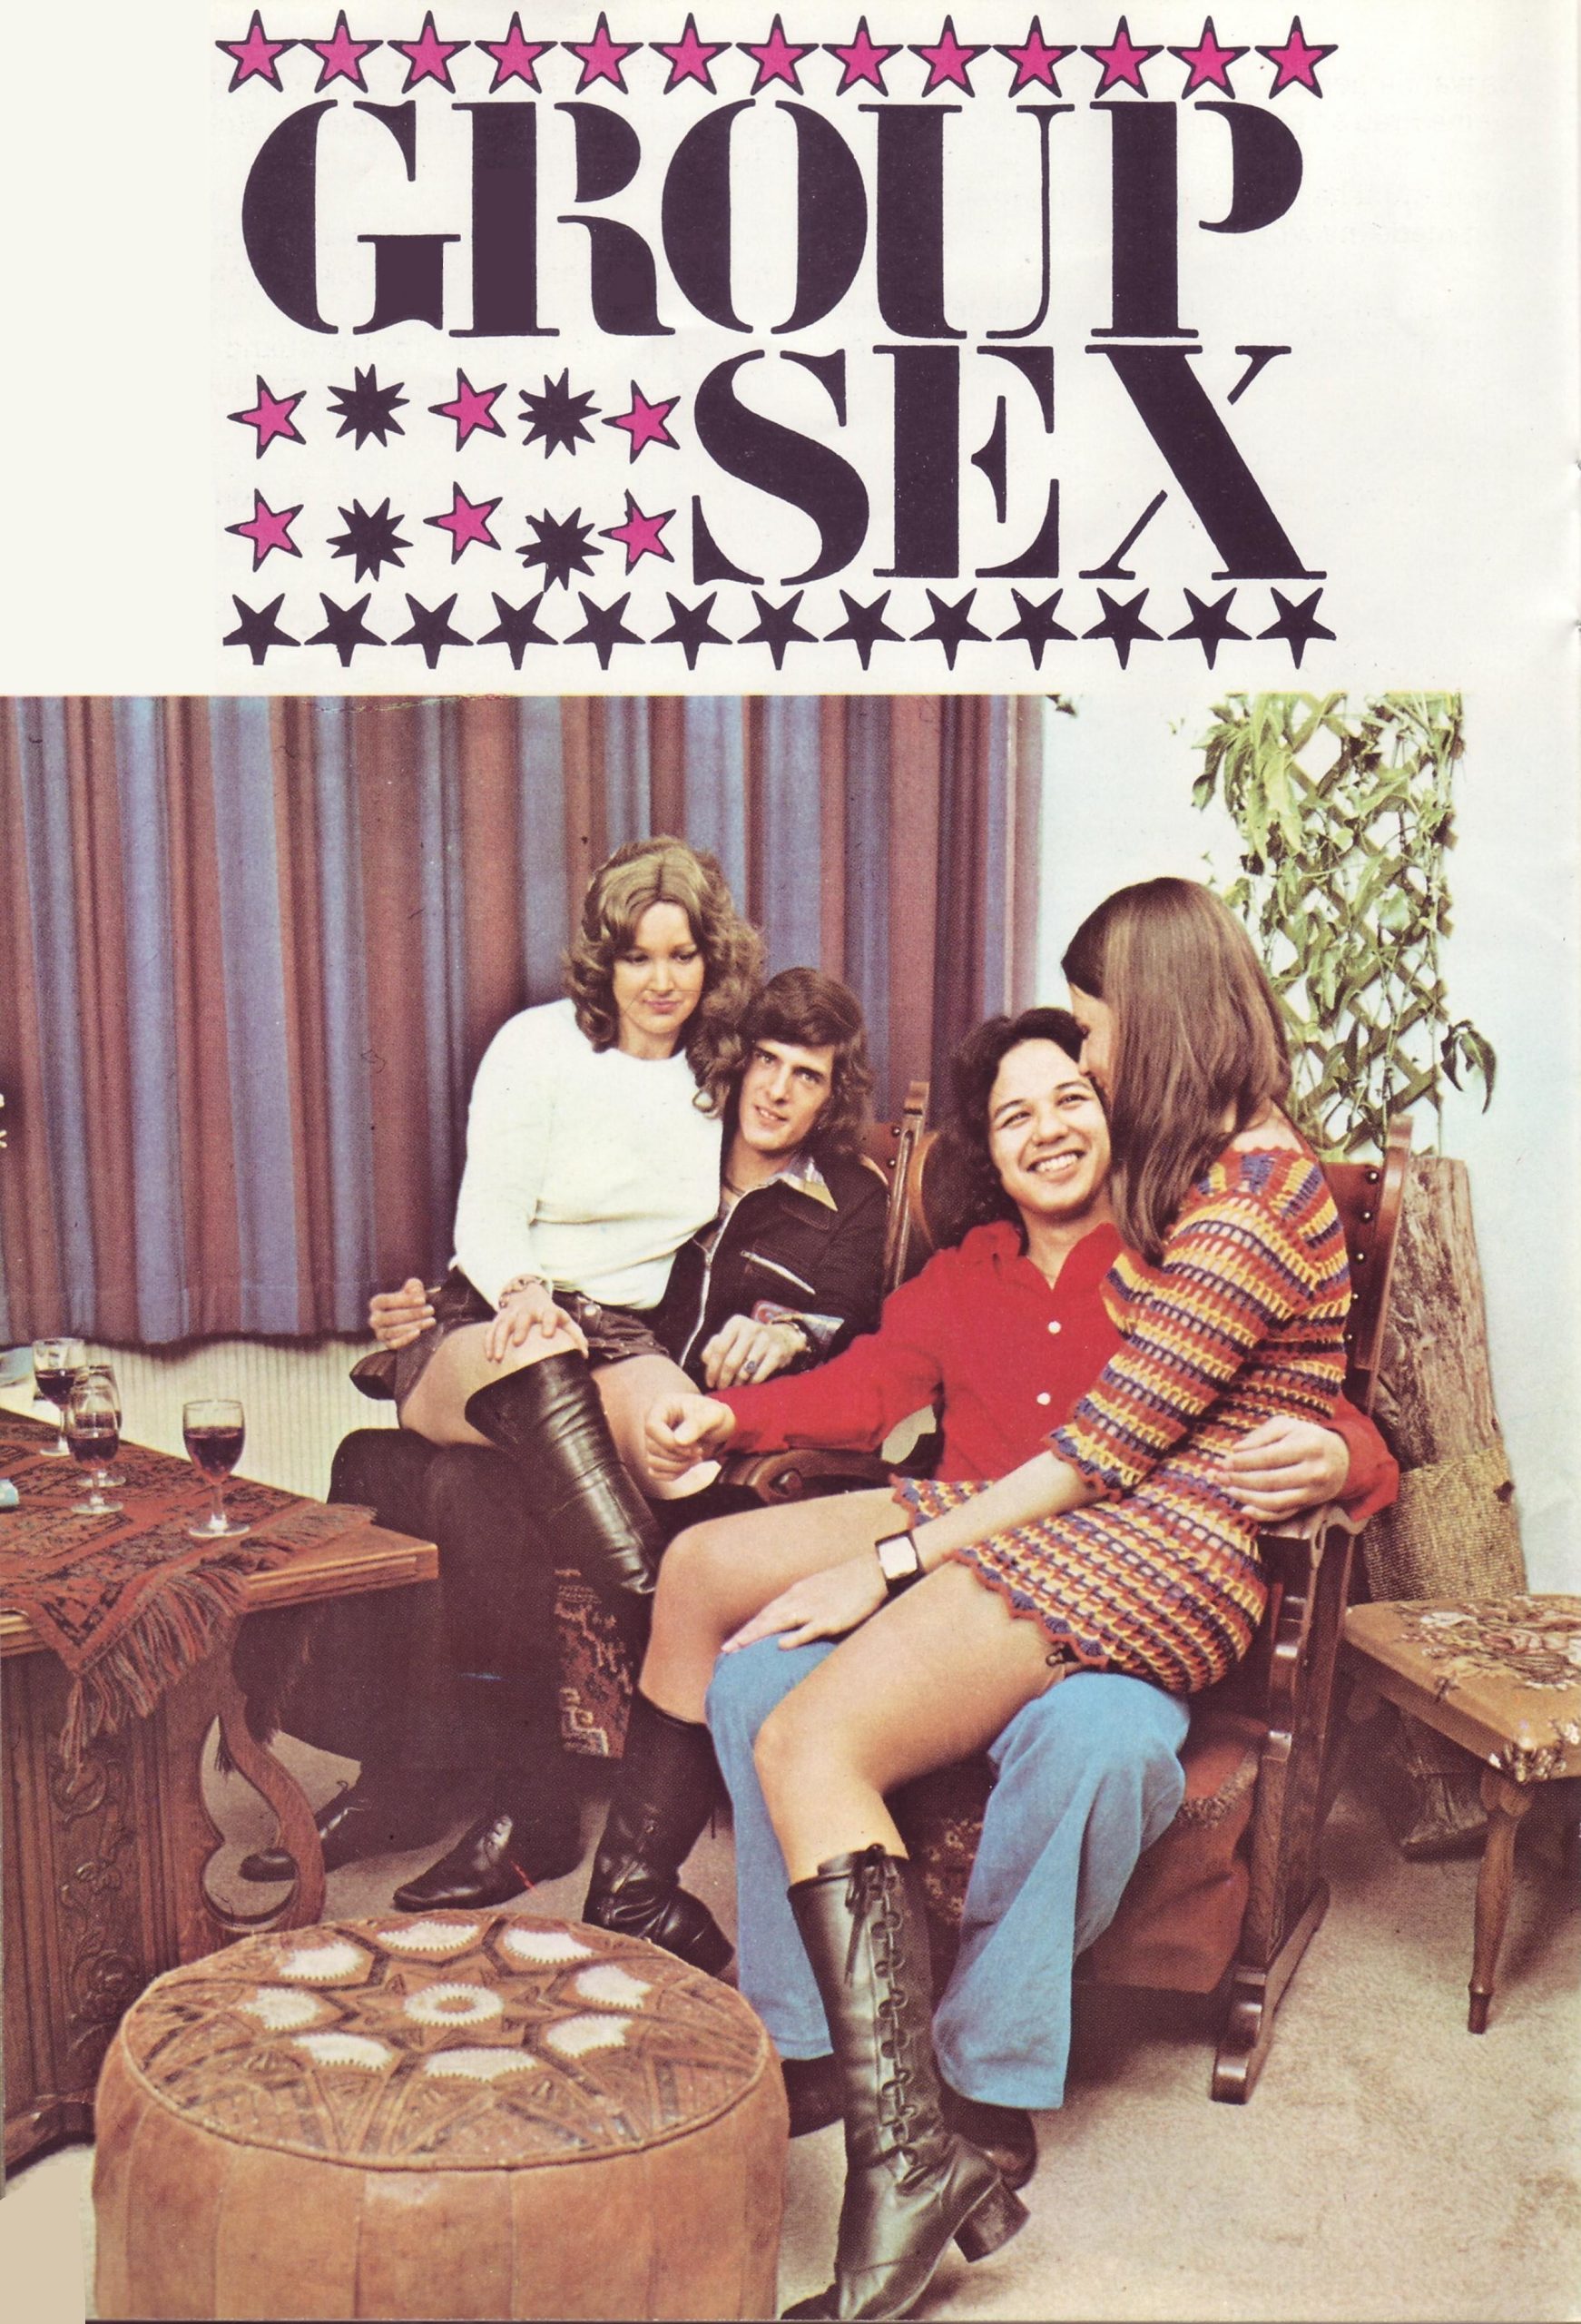 retro married group sex